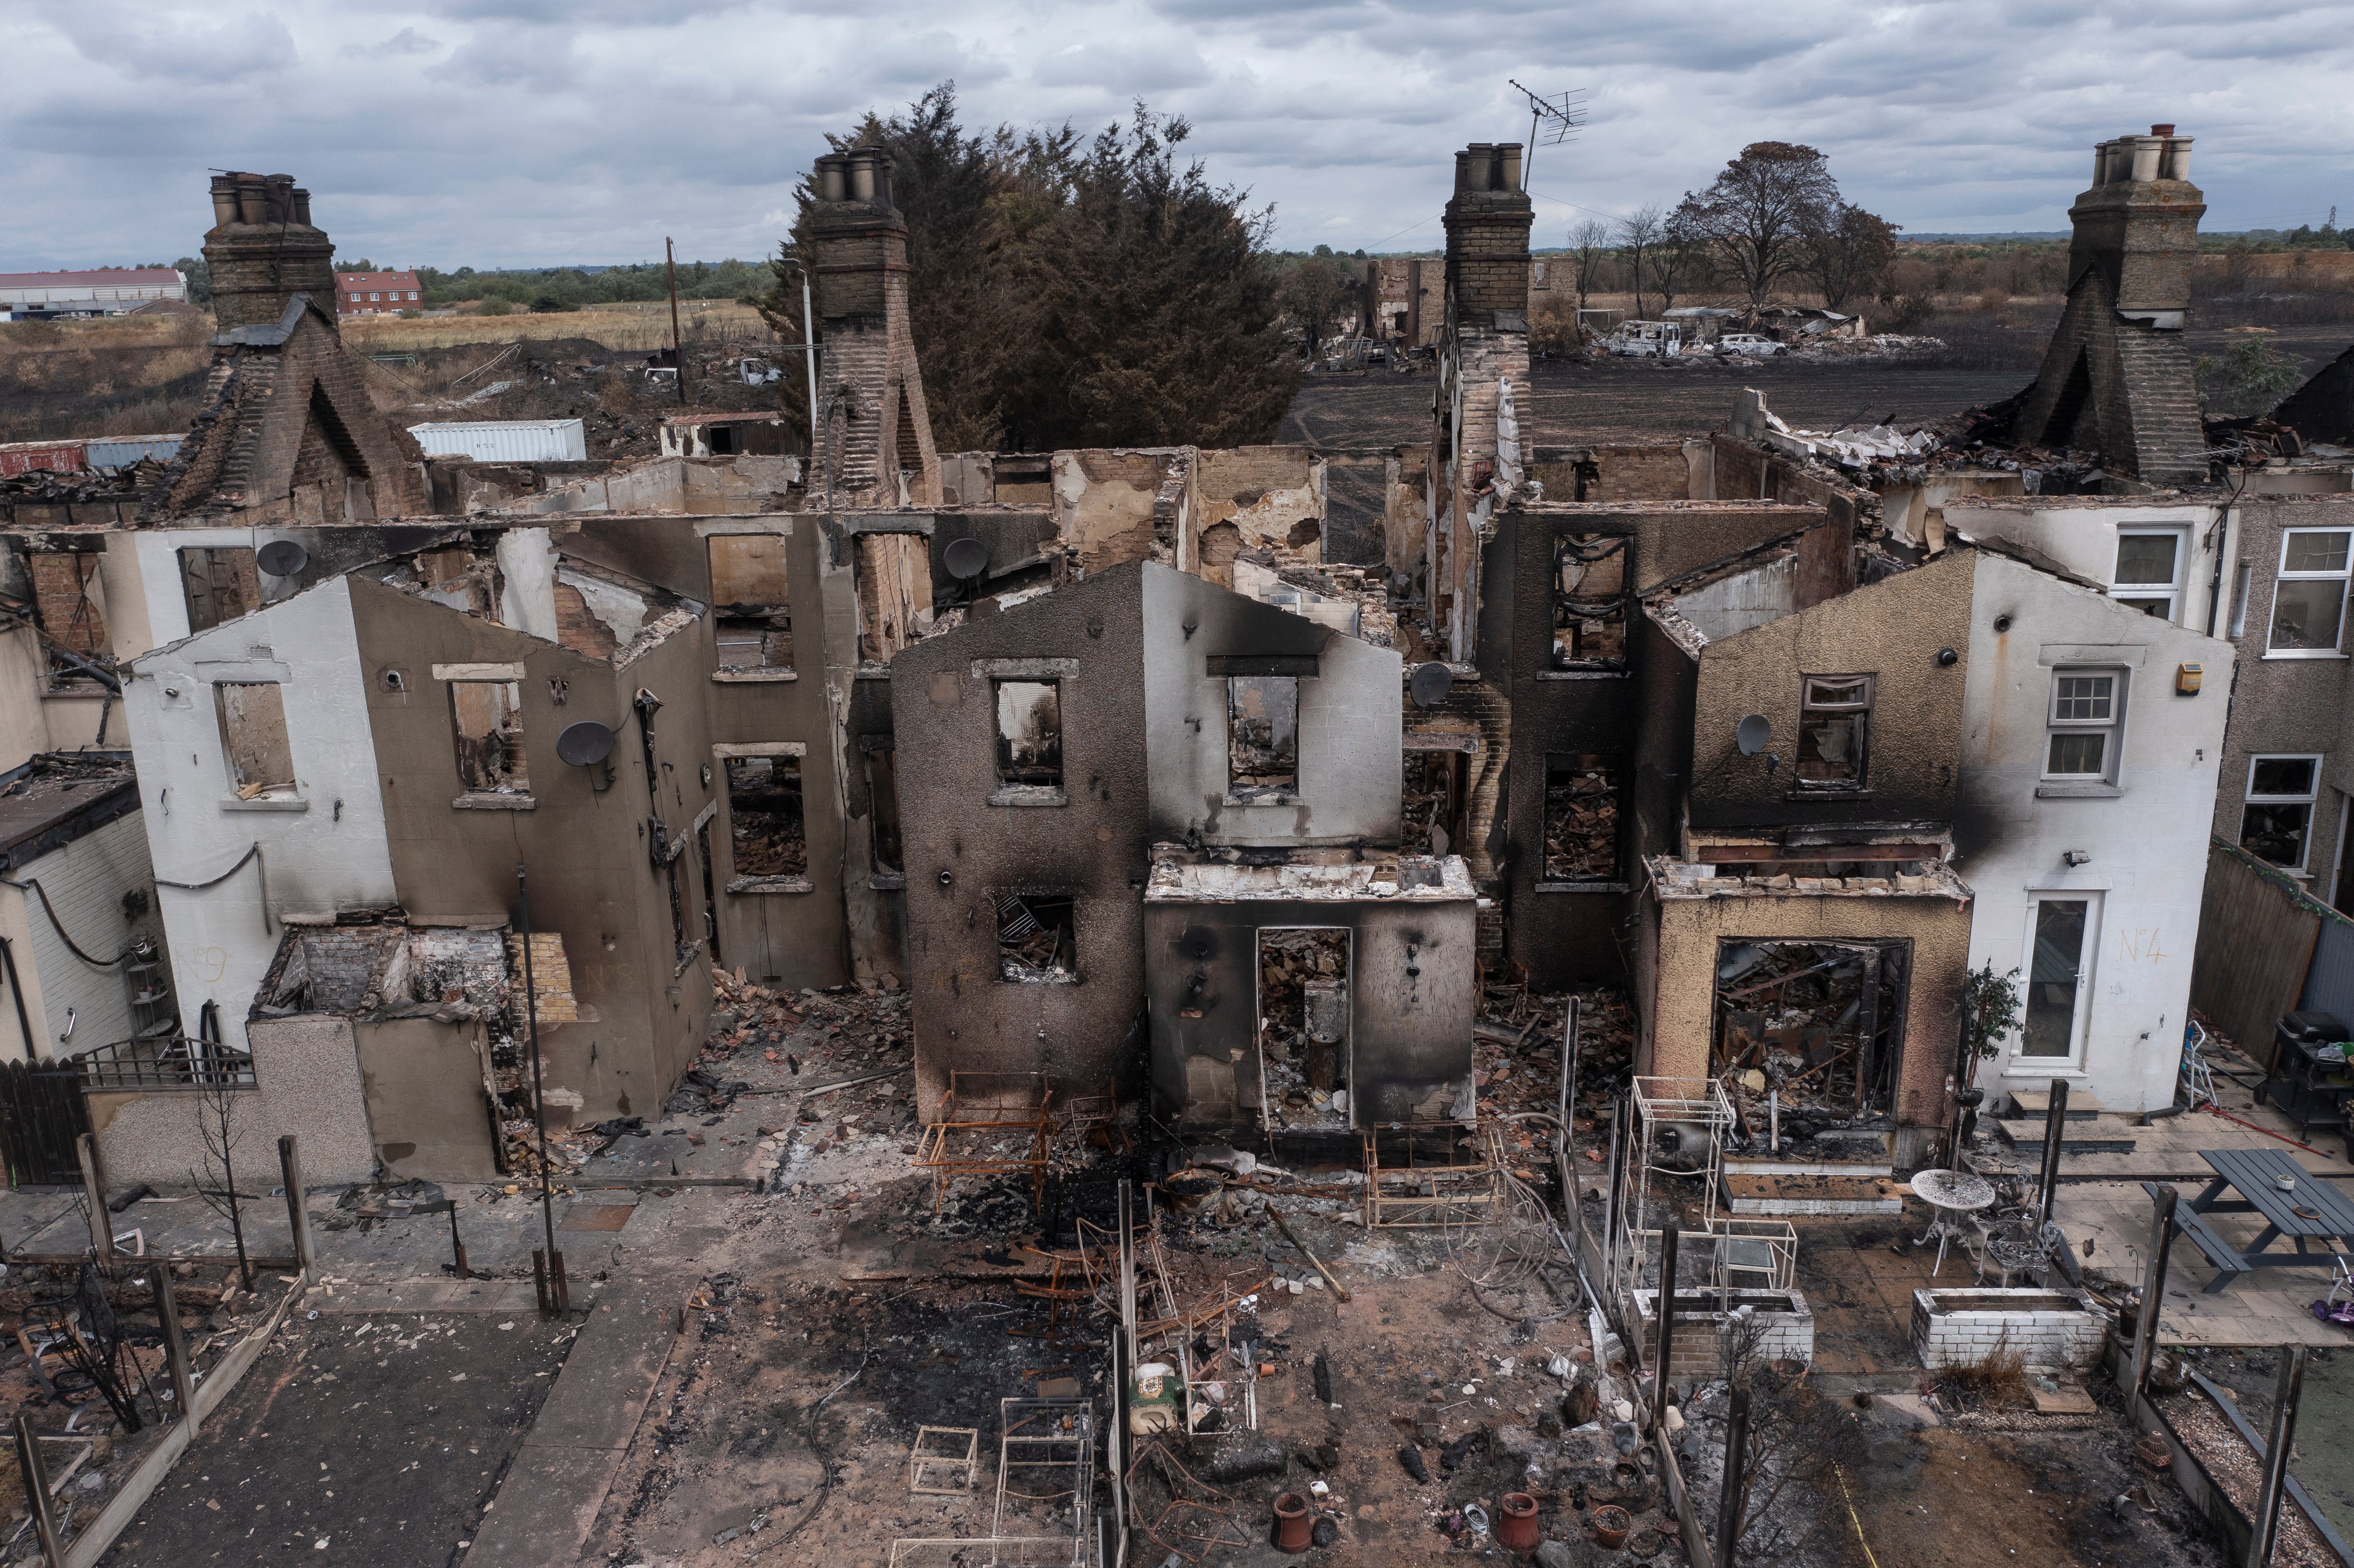 Homes gutted by fire in Wennington, Greater London.